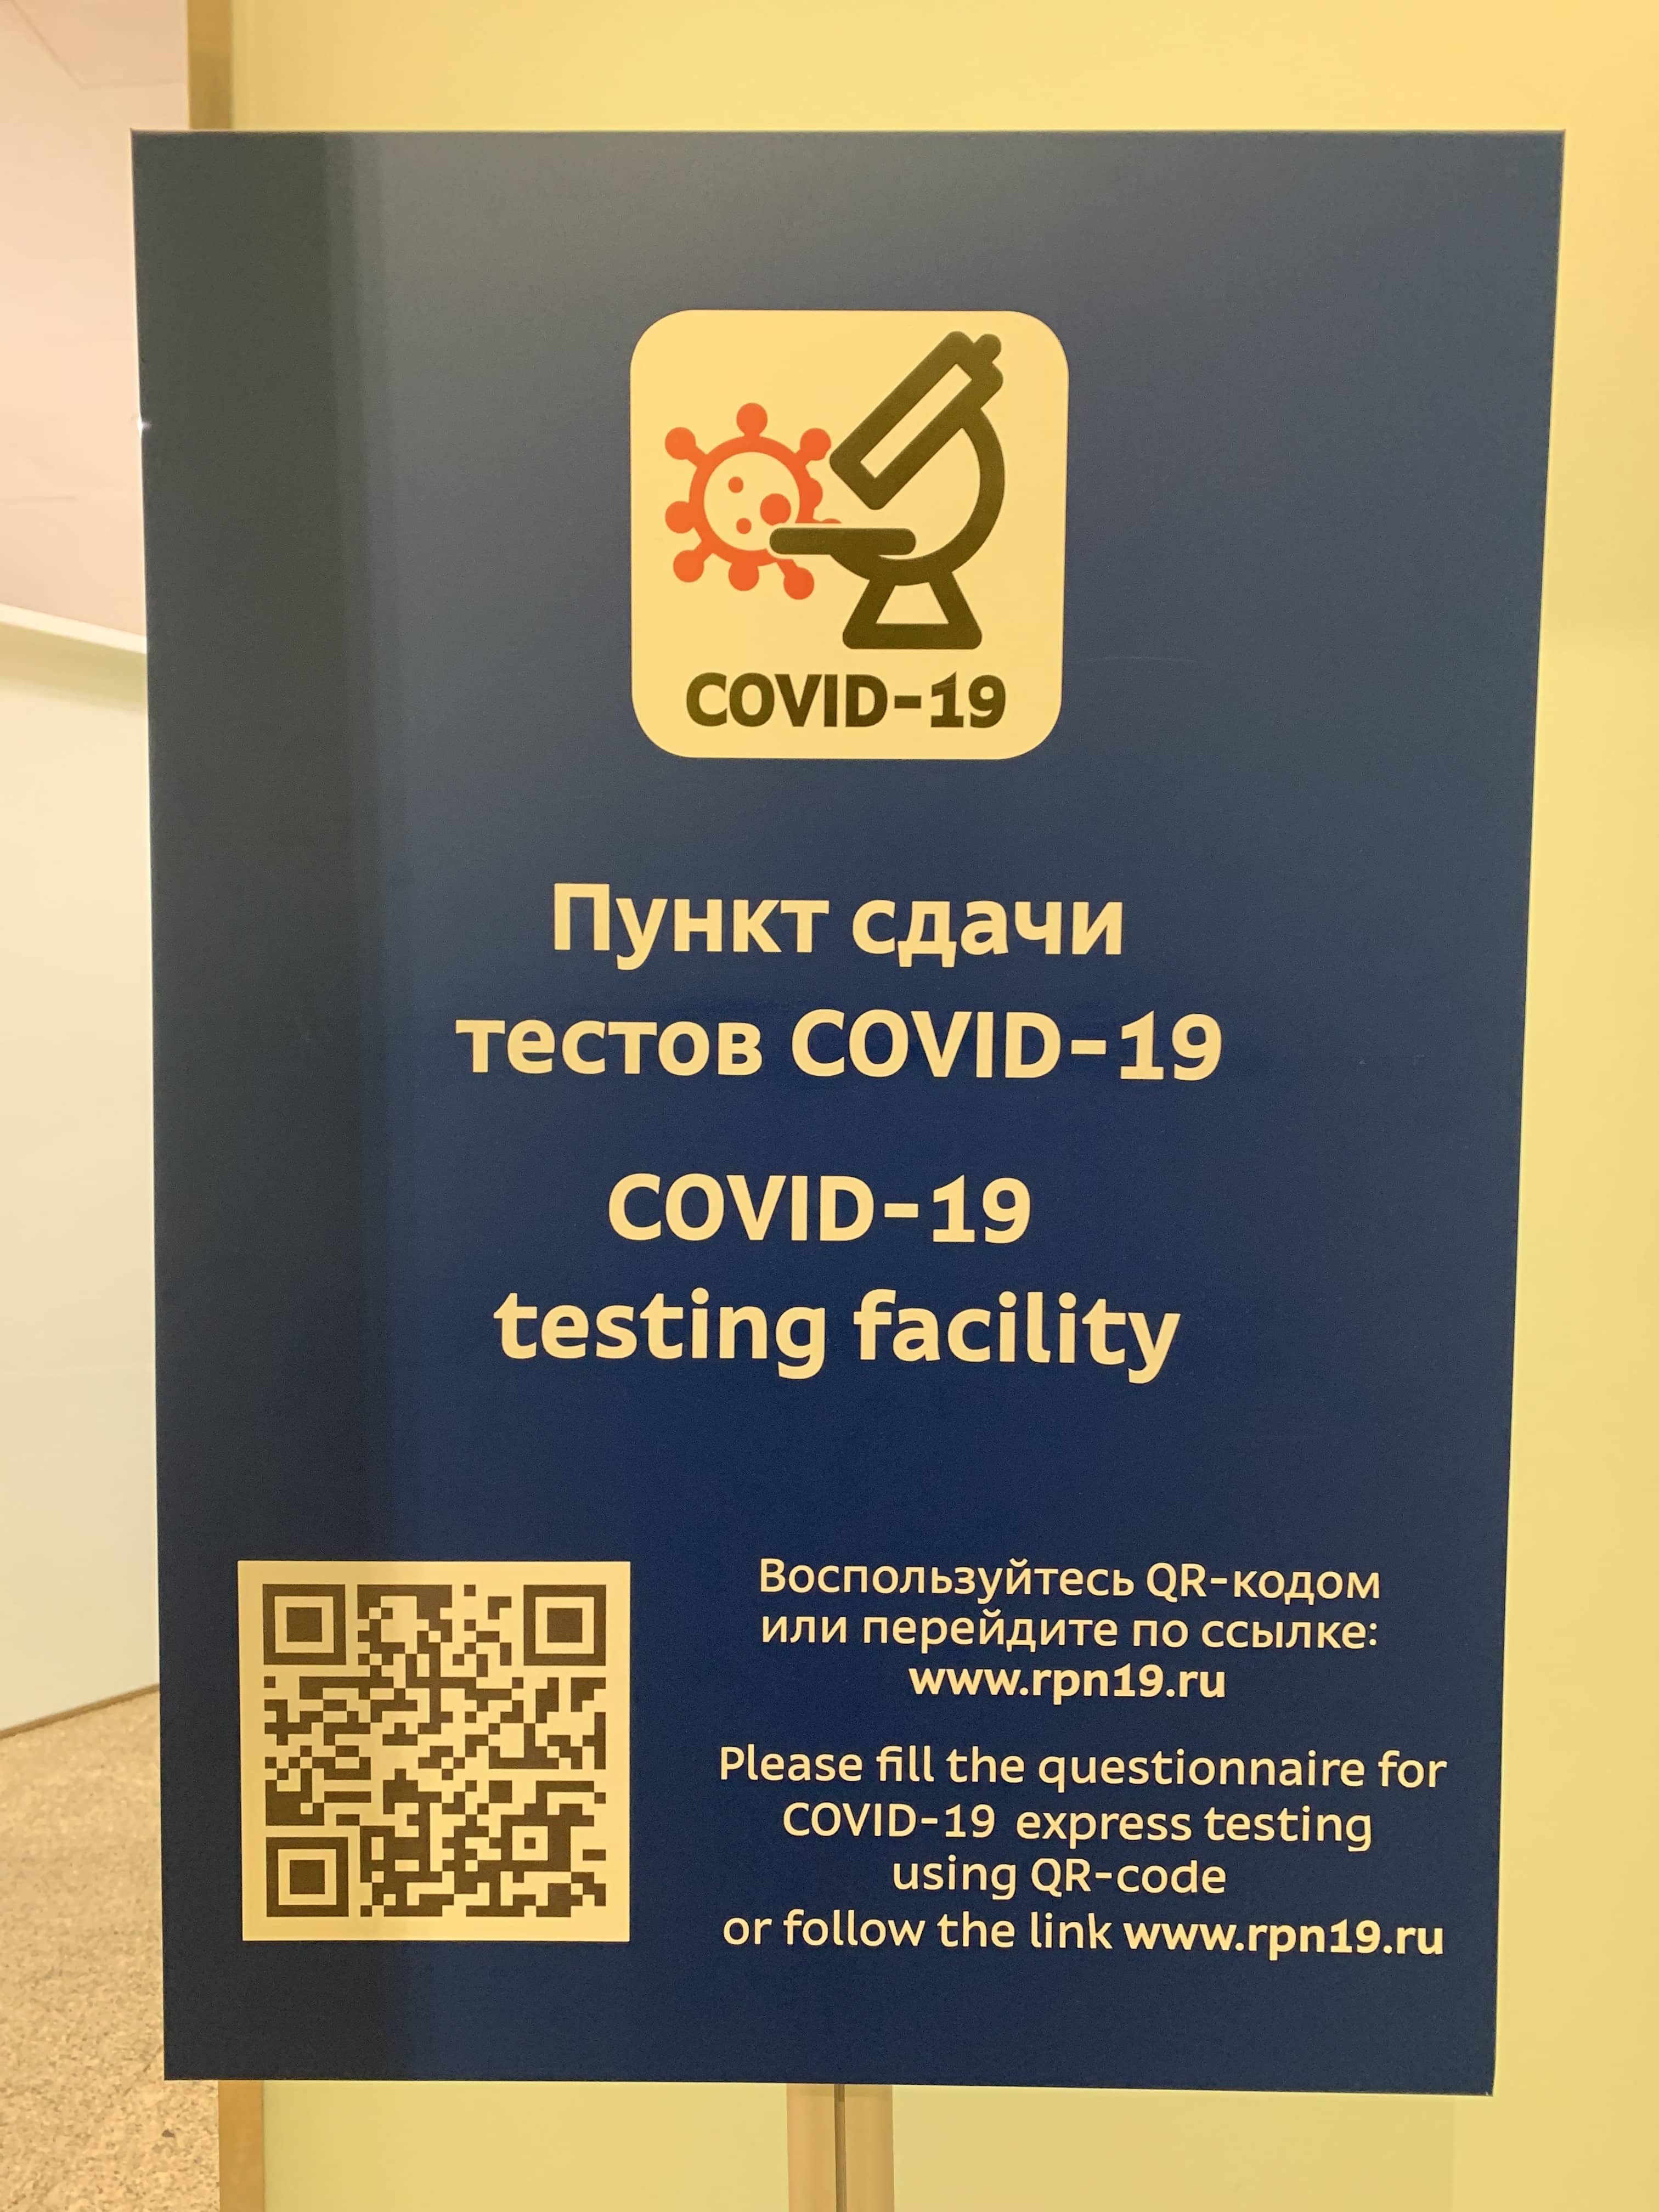 QR code information about PCR test at Pulkovo airport